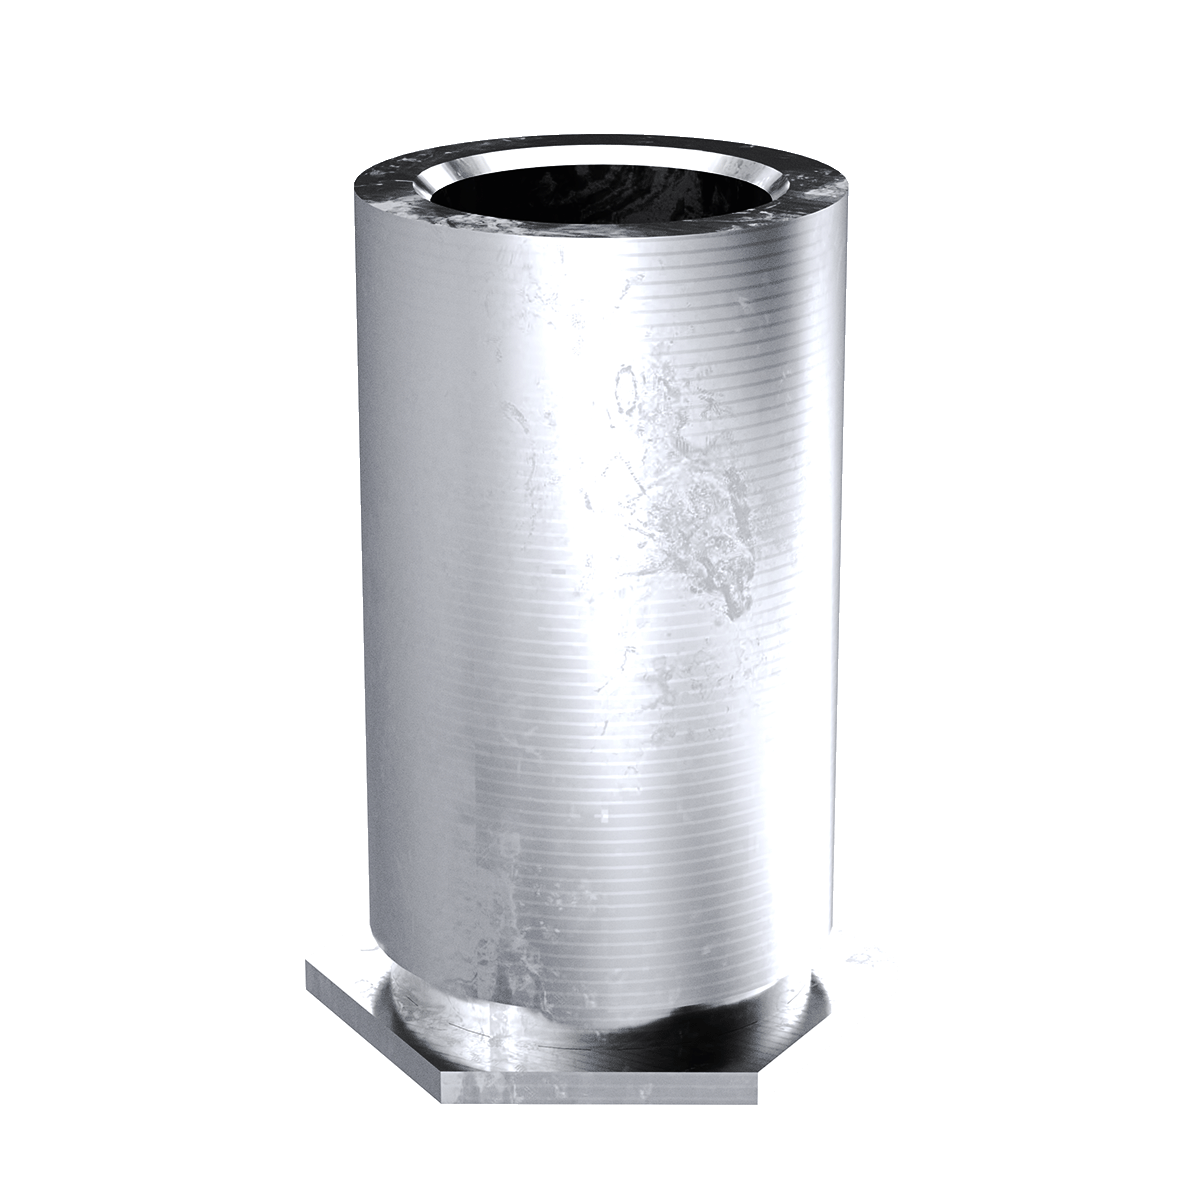 Self-Clinching Standoff, Through Unthreaded, 300 Series Stainless Steel, Passivated, 0.116 x 0.250, 100 Pack